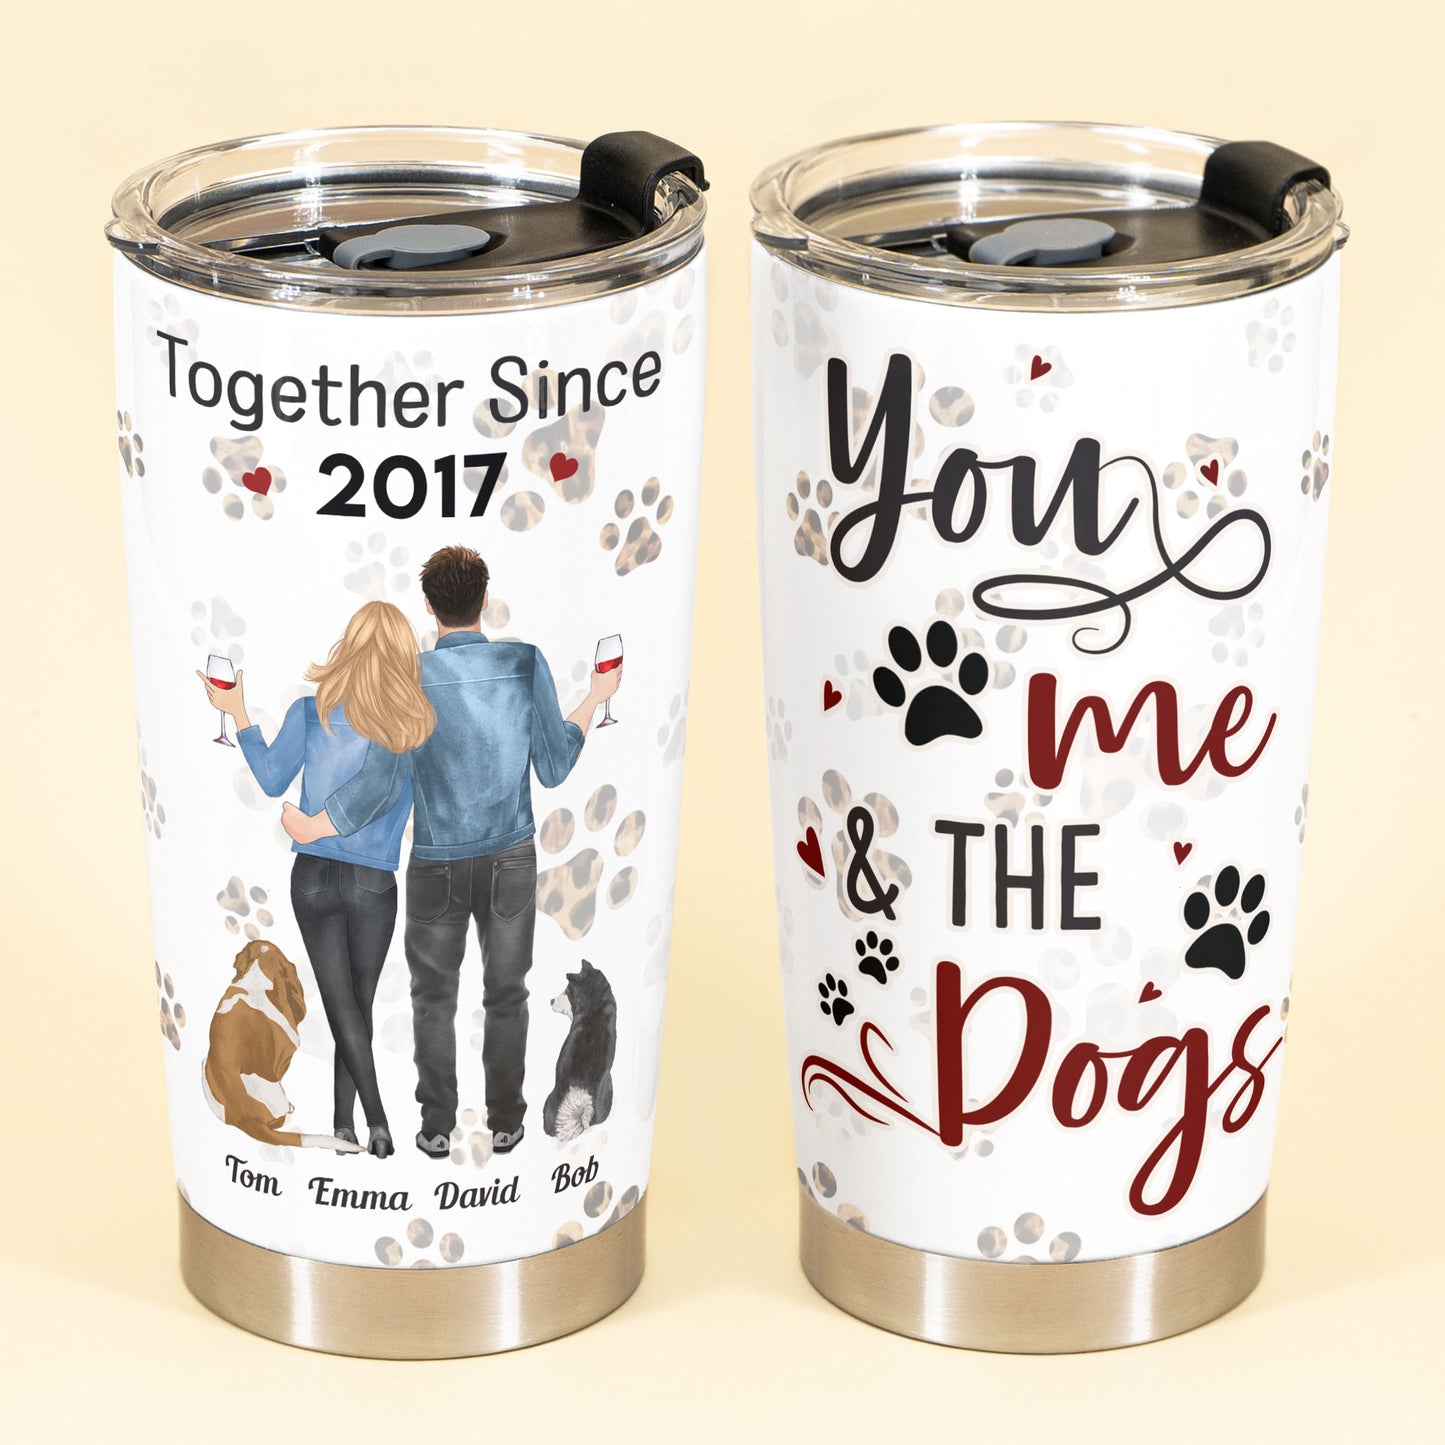 You Me The Dogs - Personalized Tumbler Cup - Birthday Anniversary Gift For Dog Lovers, Wife, Husband, Couple